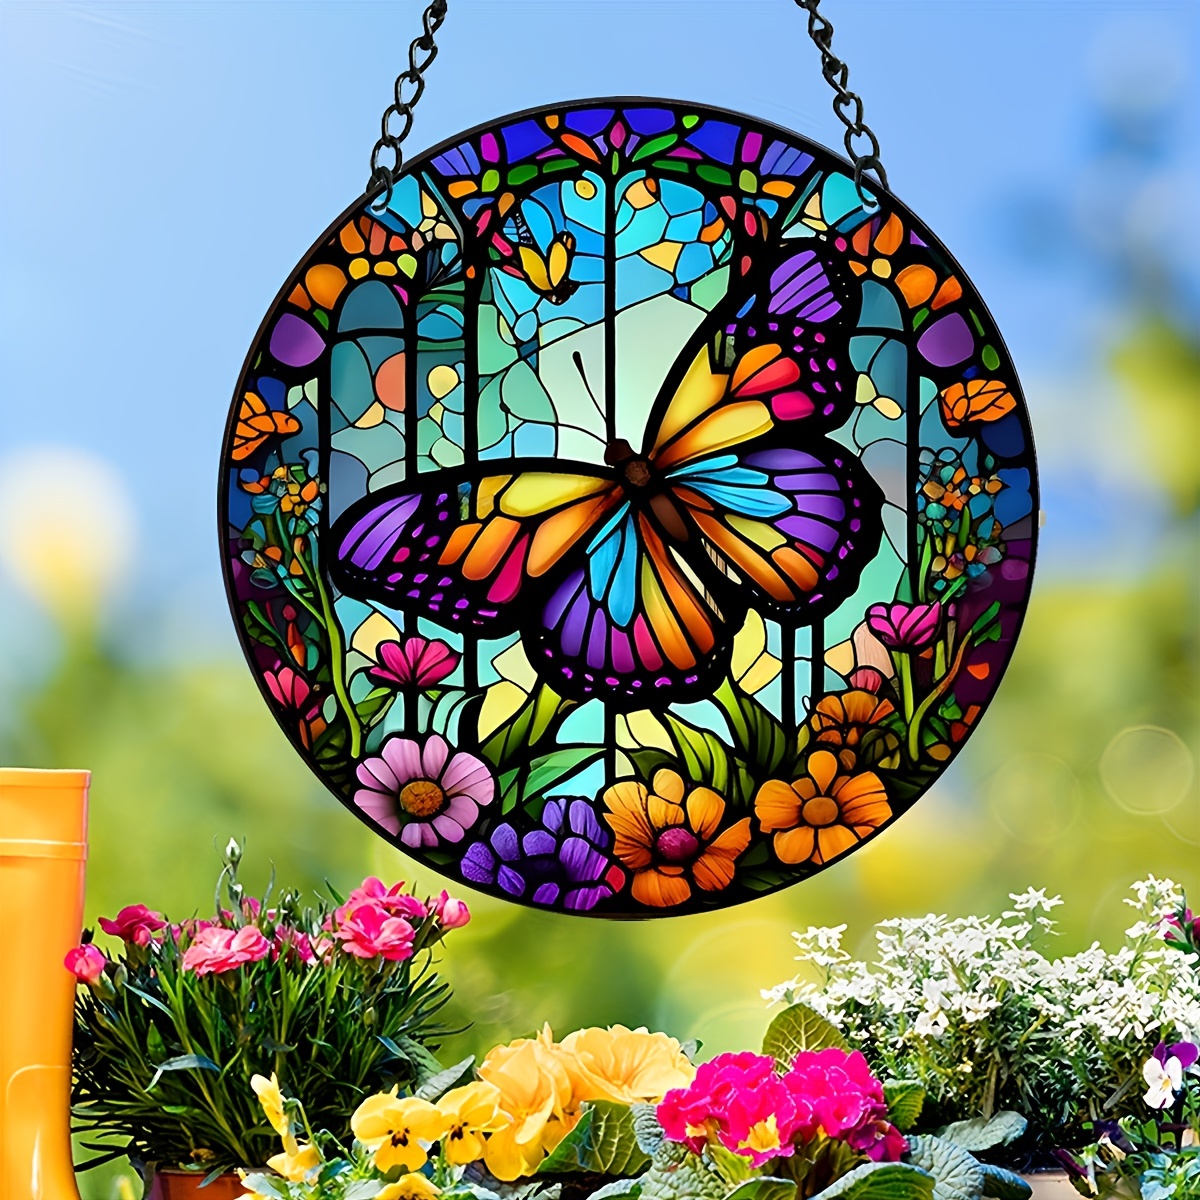 How to hang your stained glass suncatcher 